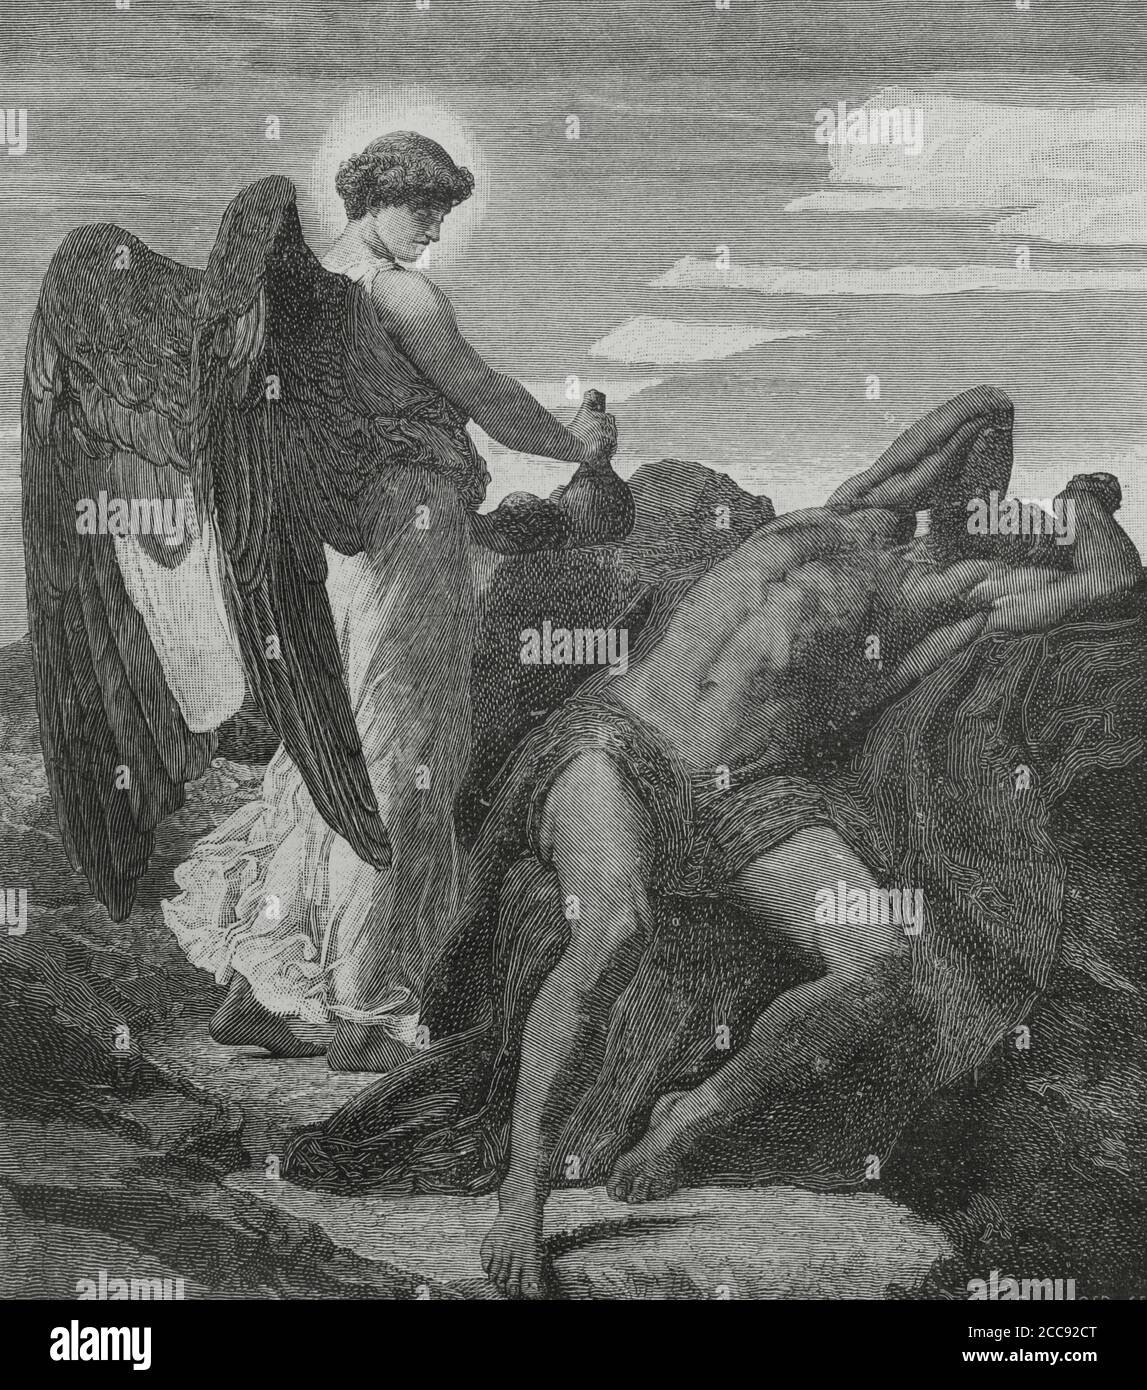 Old Testament. Elijah in the desert. Engraving after a painting by Frederic Leighton (1830-1896). La Ilustracion Española y Americana, 1881. Stock Photo